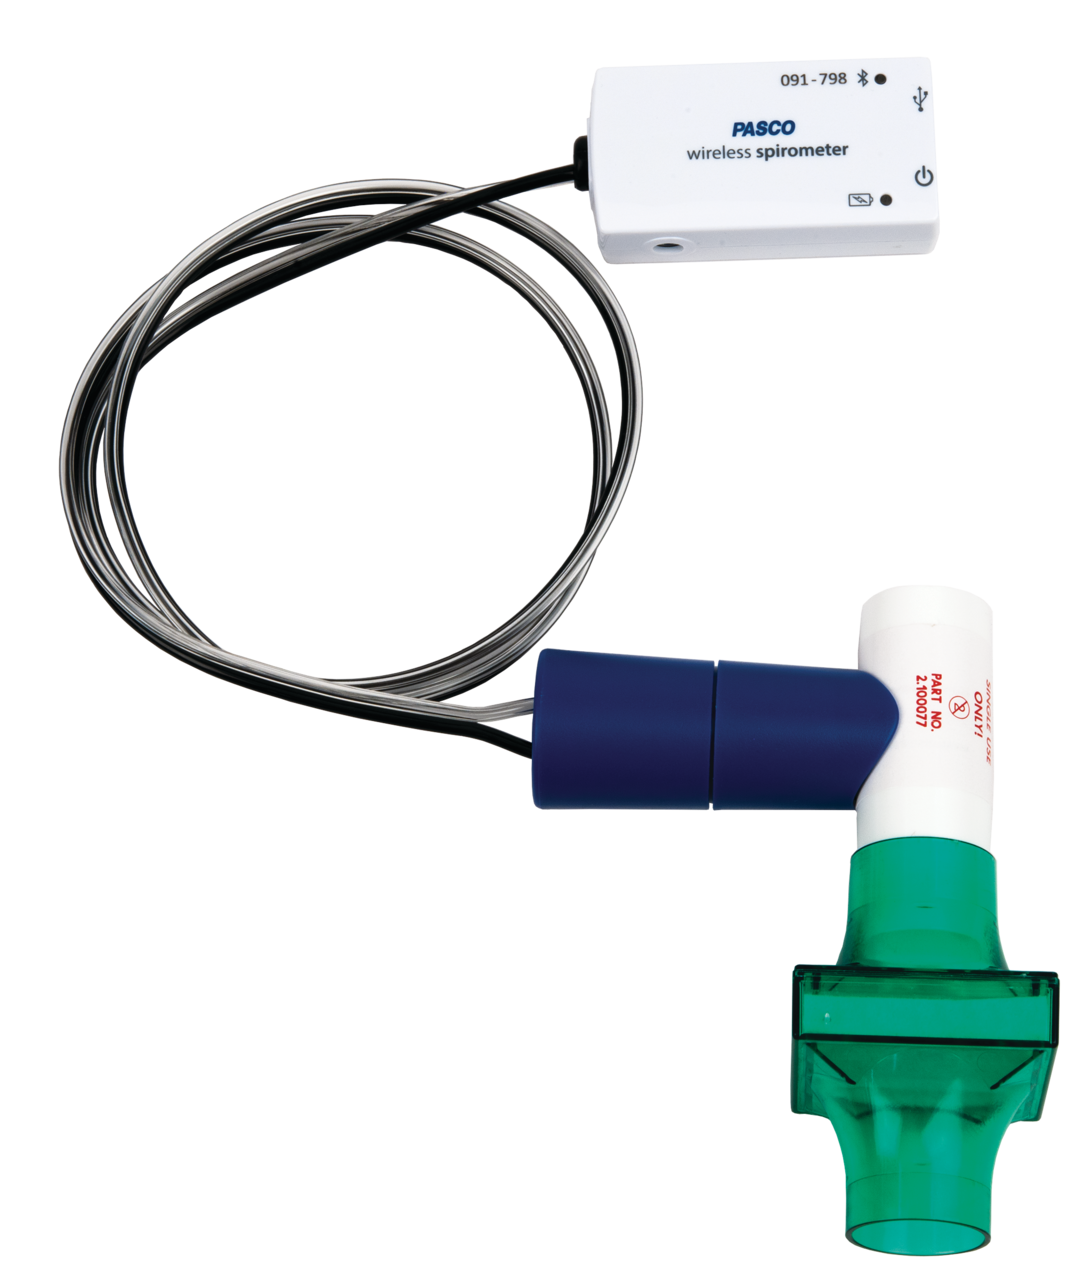 Featured image for “Draadloze spirometer”